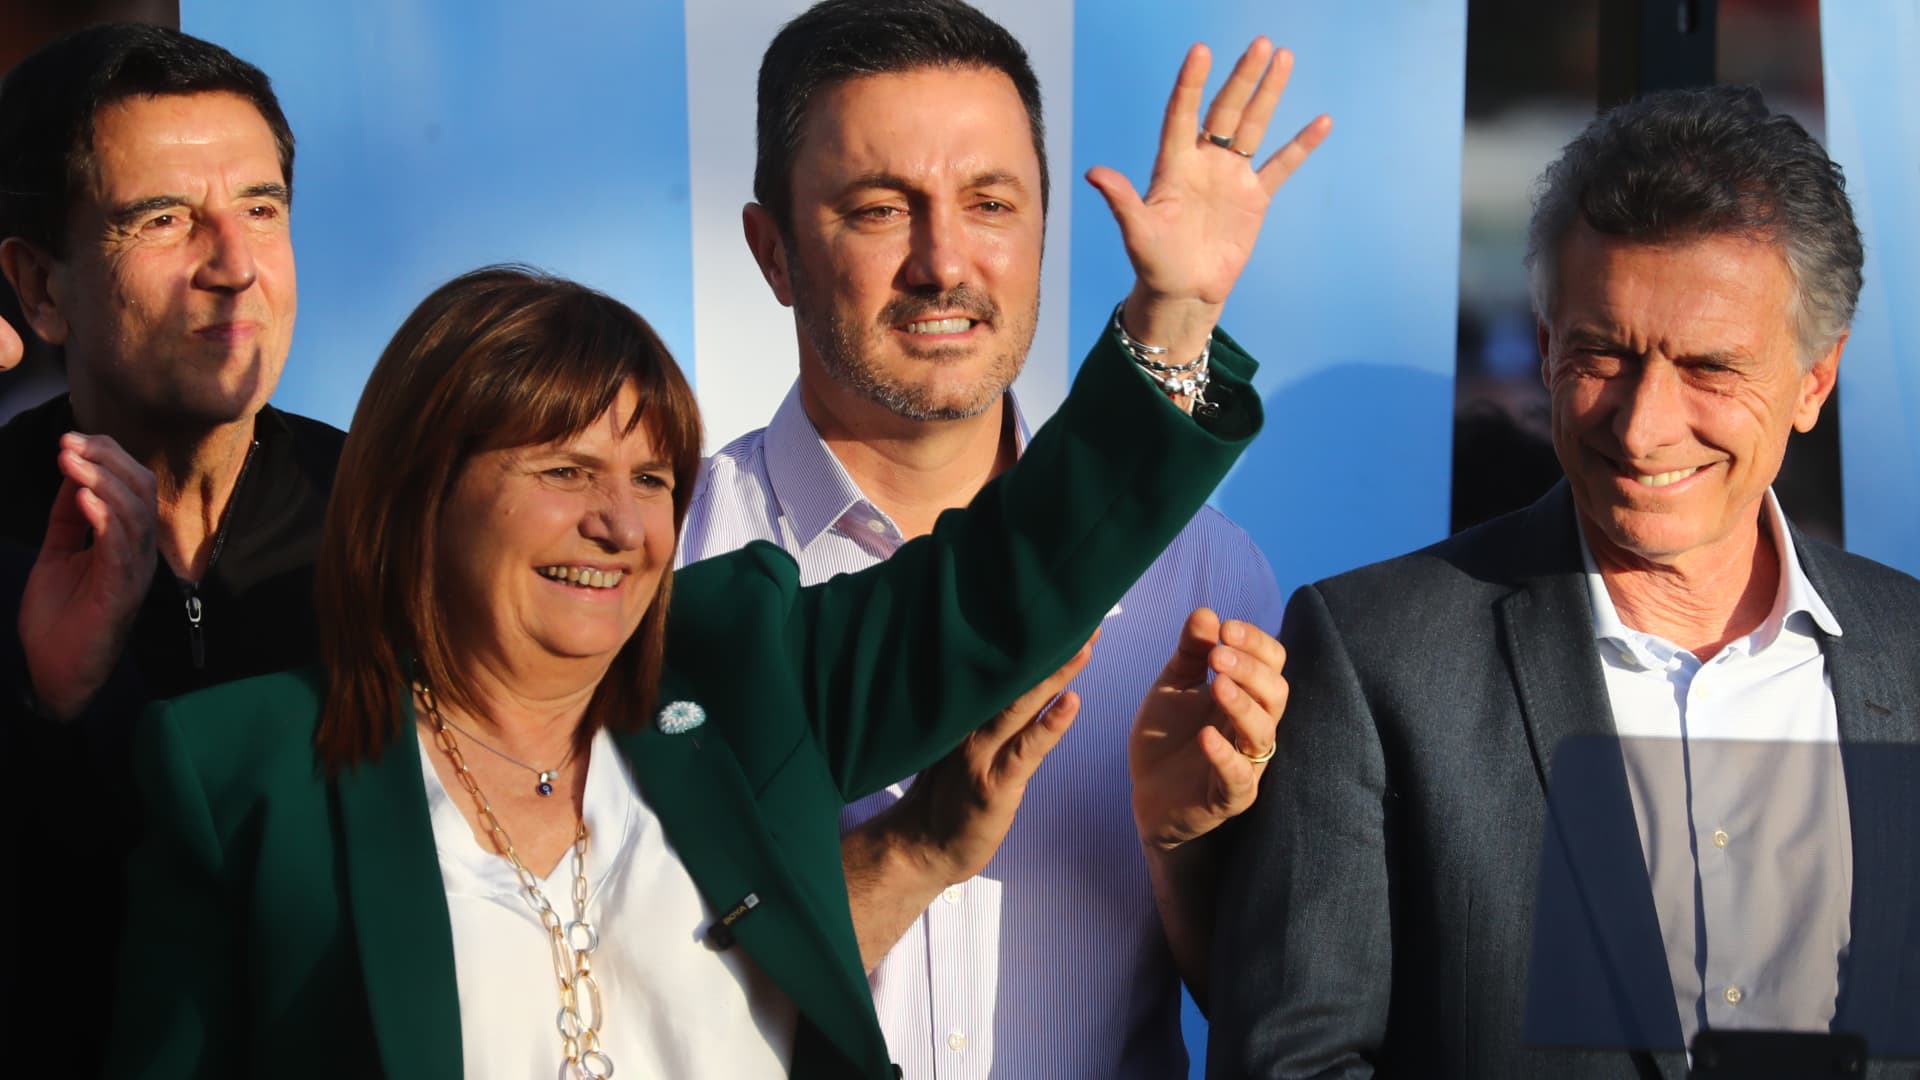 (L-R) Presidential Candidate for Juntos Por el Cambio Patricia Bullrich waves to supporters alongside Vice Presidential Candidate Luis Petri and former President of Argentina Mauricio Macri during her closing presidential rally on Oct. 19, 2023 in Lomas de Zamora, Argentina.